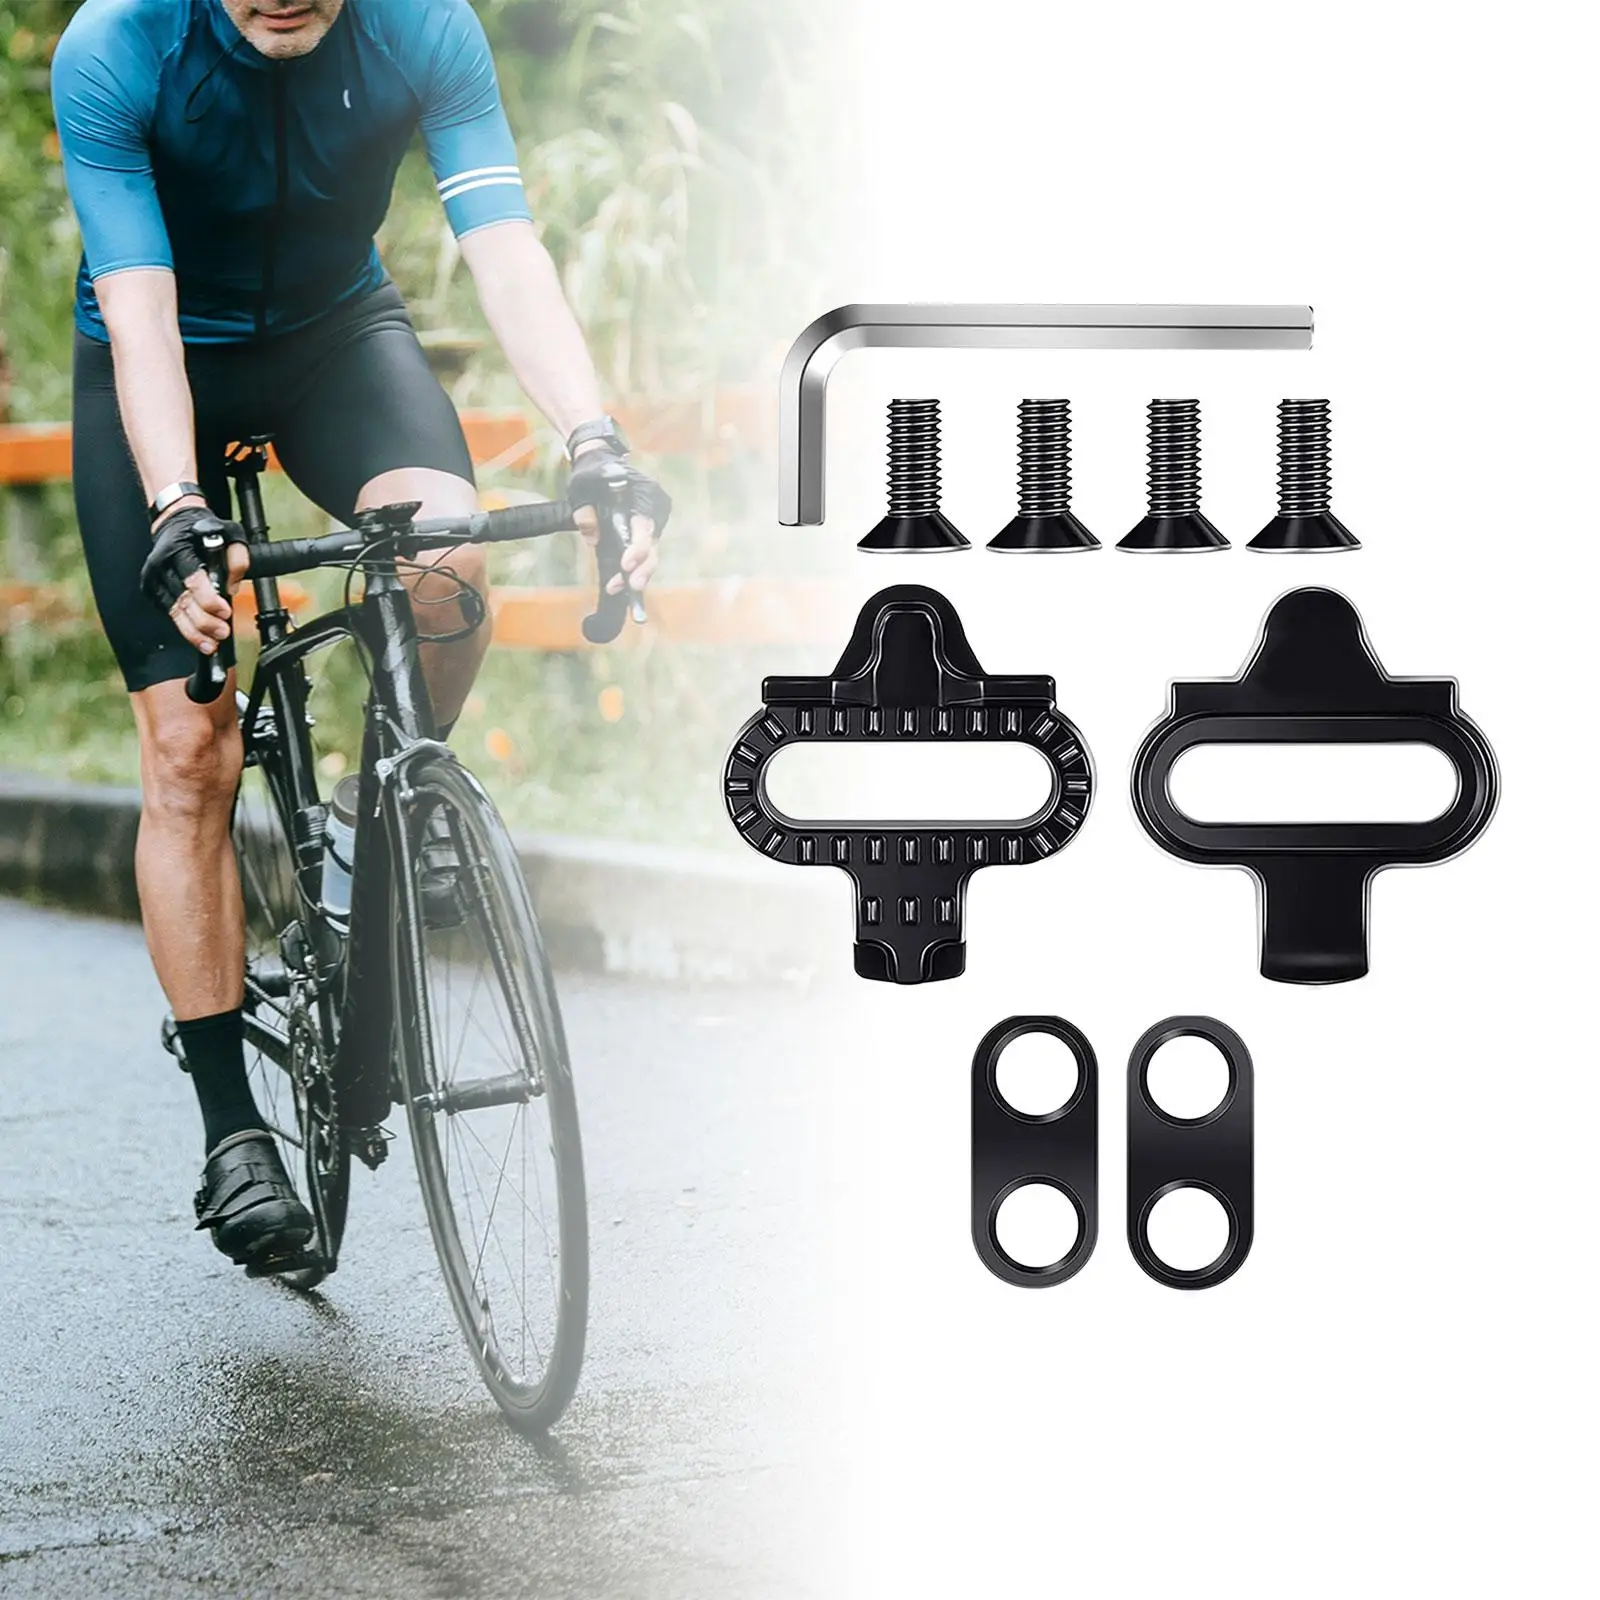 Pedal Lock Riding Shoes Splint Set Stable Protect Feet/ankles/Legs Easy Installation Cycling Components Cleats Pedal Locking Set